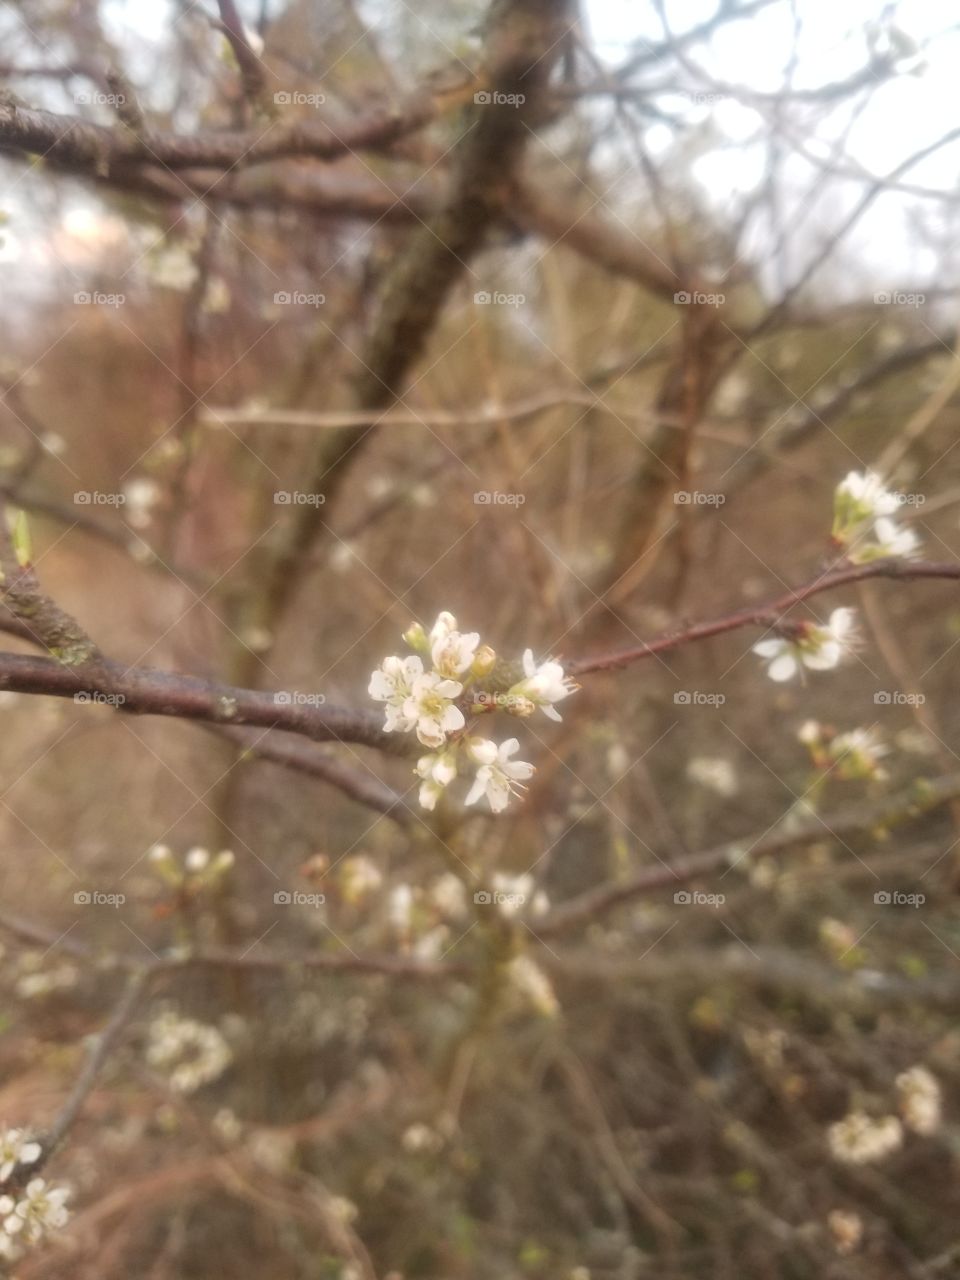 I always get so excited when I see my Chickasaw plum trees (Prunus angustifolia) begin to blossom, because they are the very first trees to bloom in spring.